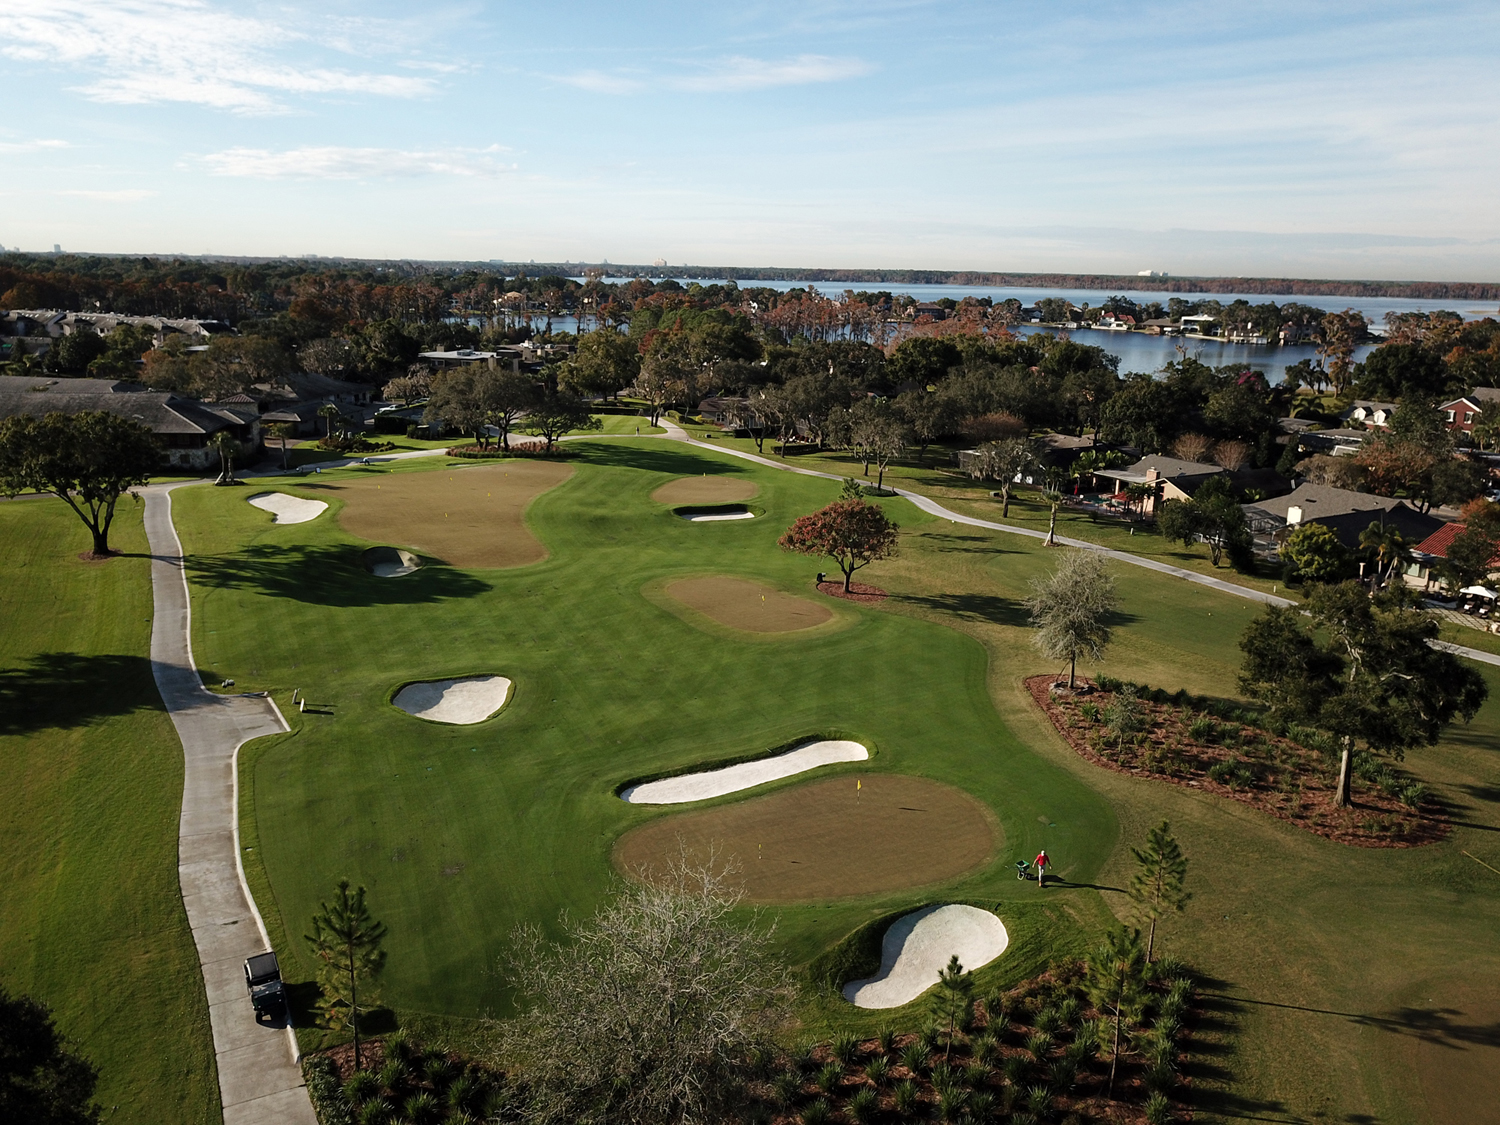 An Upgraded Short Game Area - Taking Bay Hill Club & Lodge into